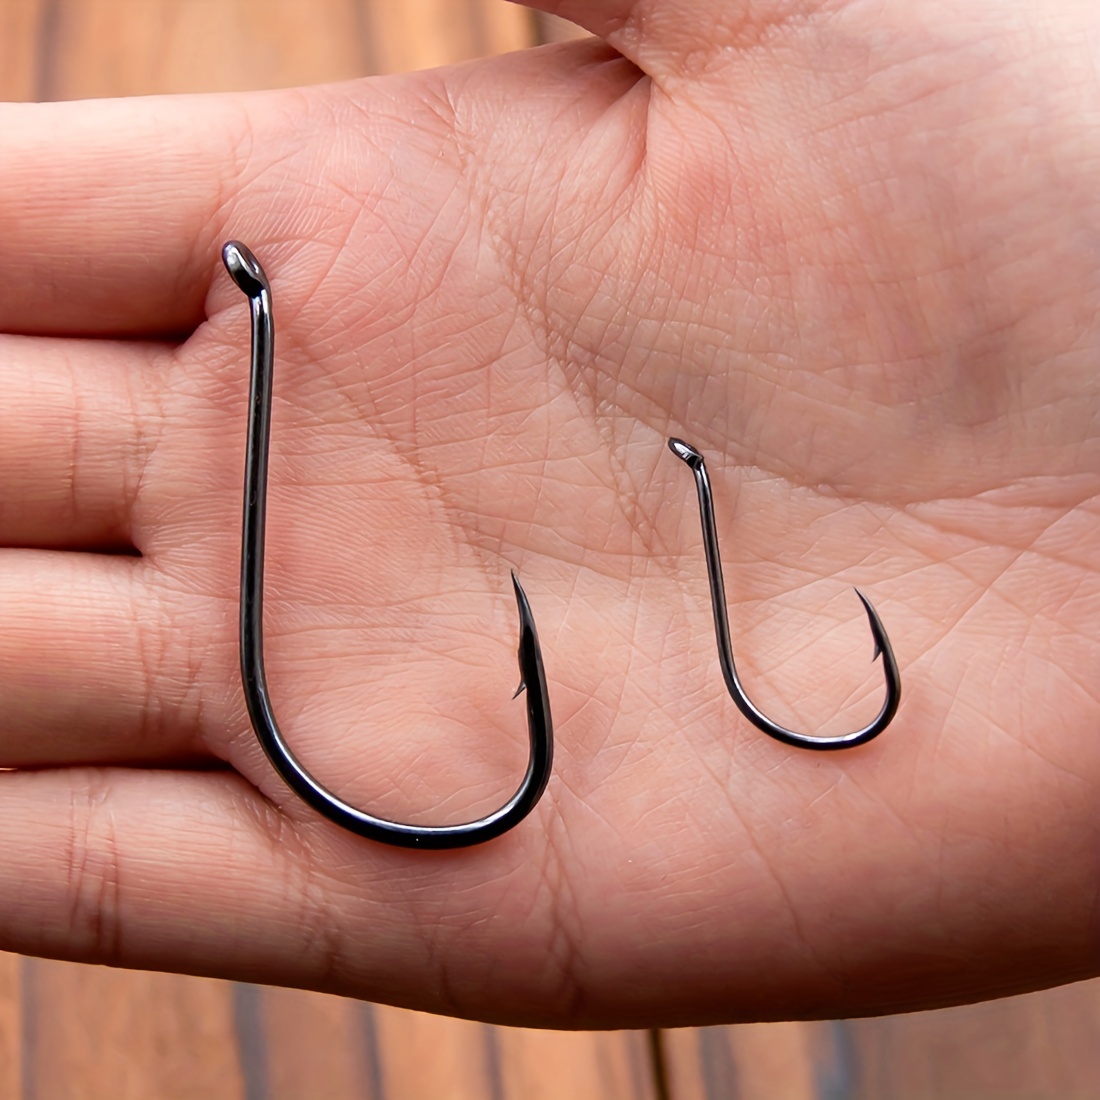 50/100pcs High Strength and Corrosion Resistant Saltwater Fishing Hooks -  9km Long Shanked High Carbon Steel Terminal Tackle for Bait in Freshwater an